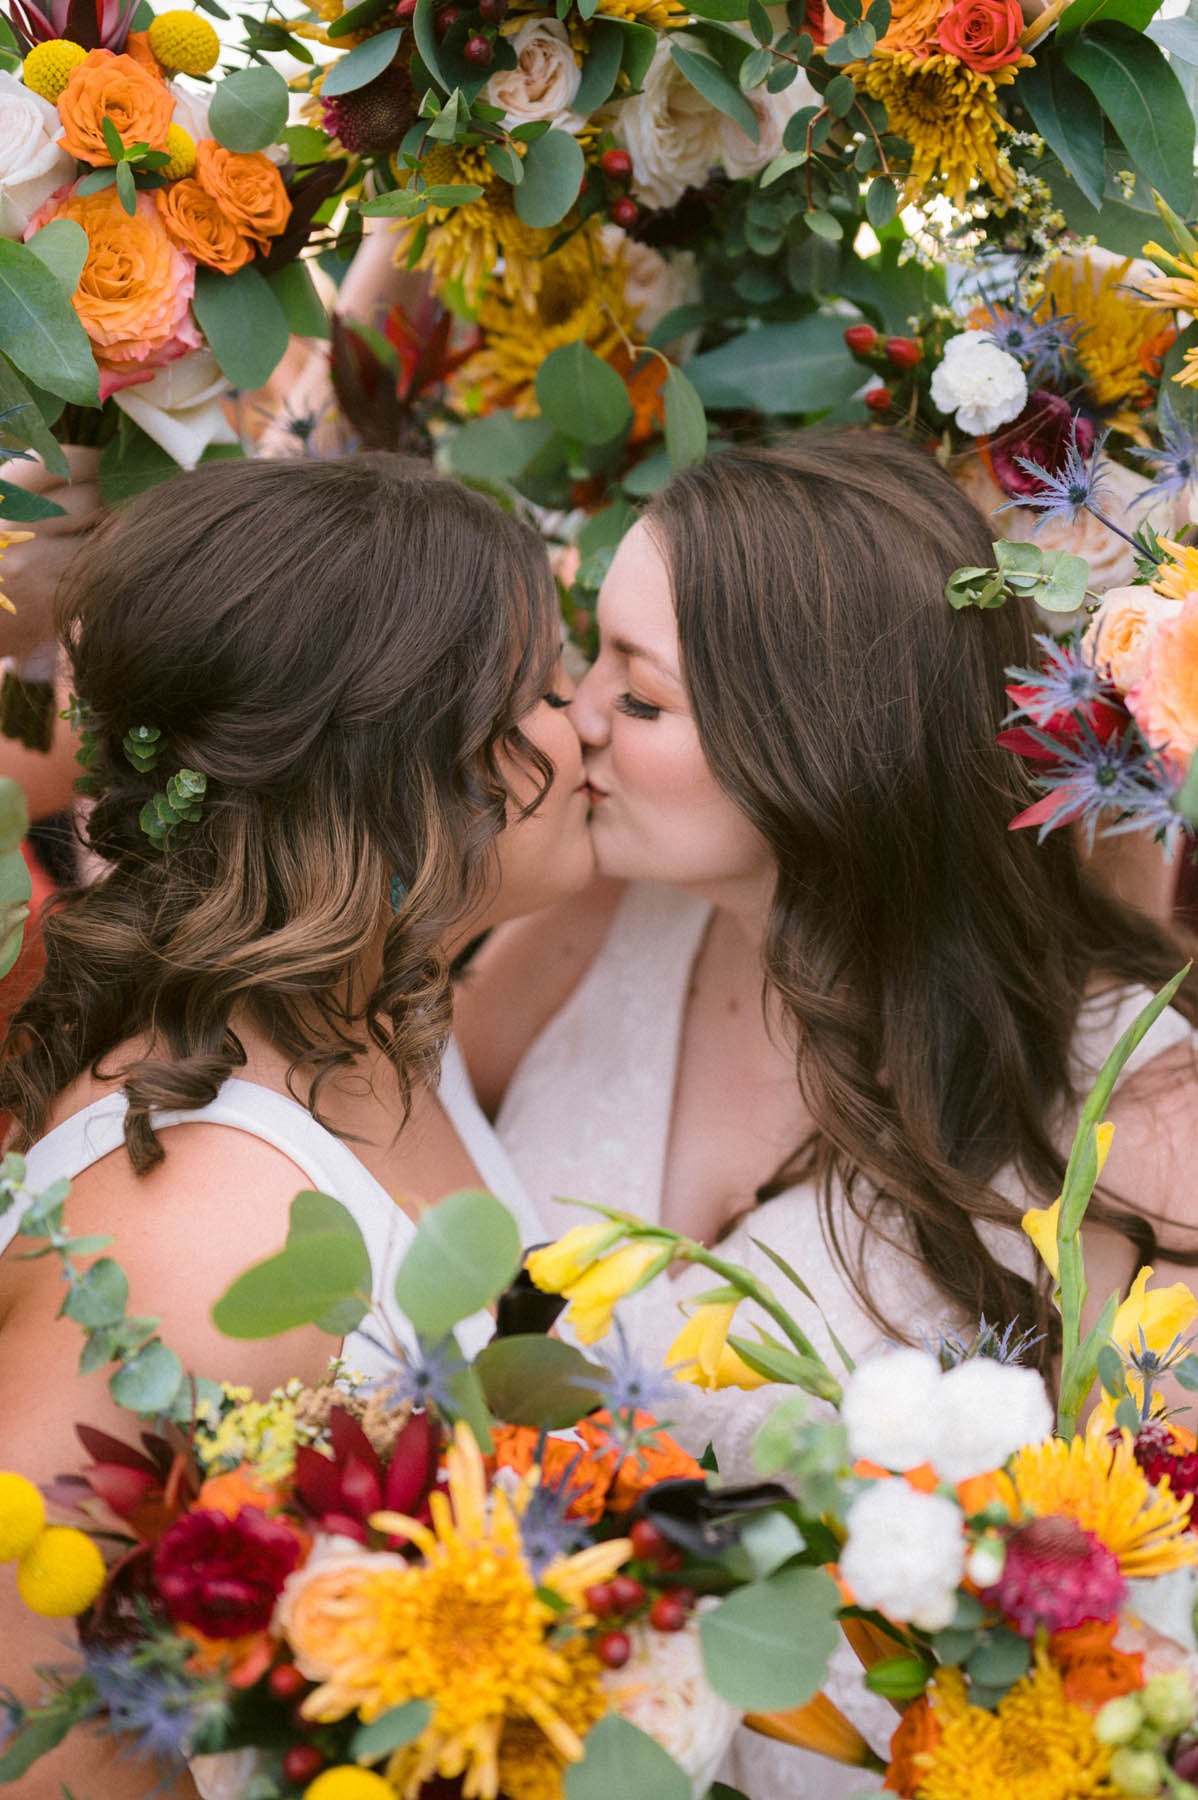 Two white people with brown hair kiss, surrounded by bouquets of vivid jewel tone flowers.